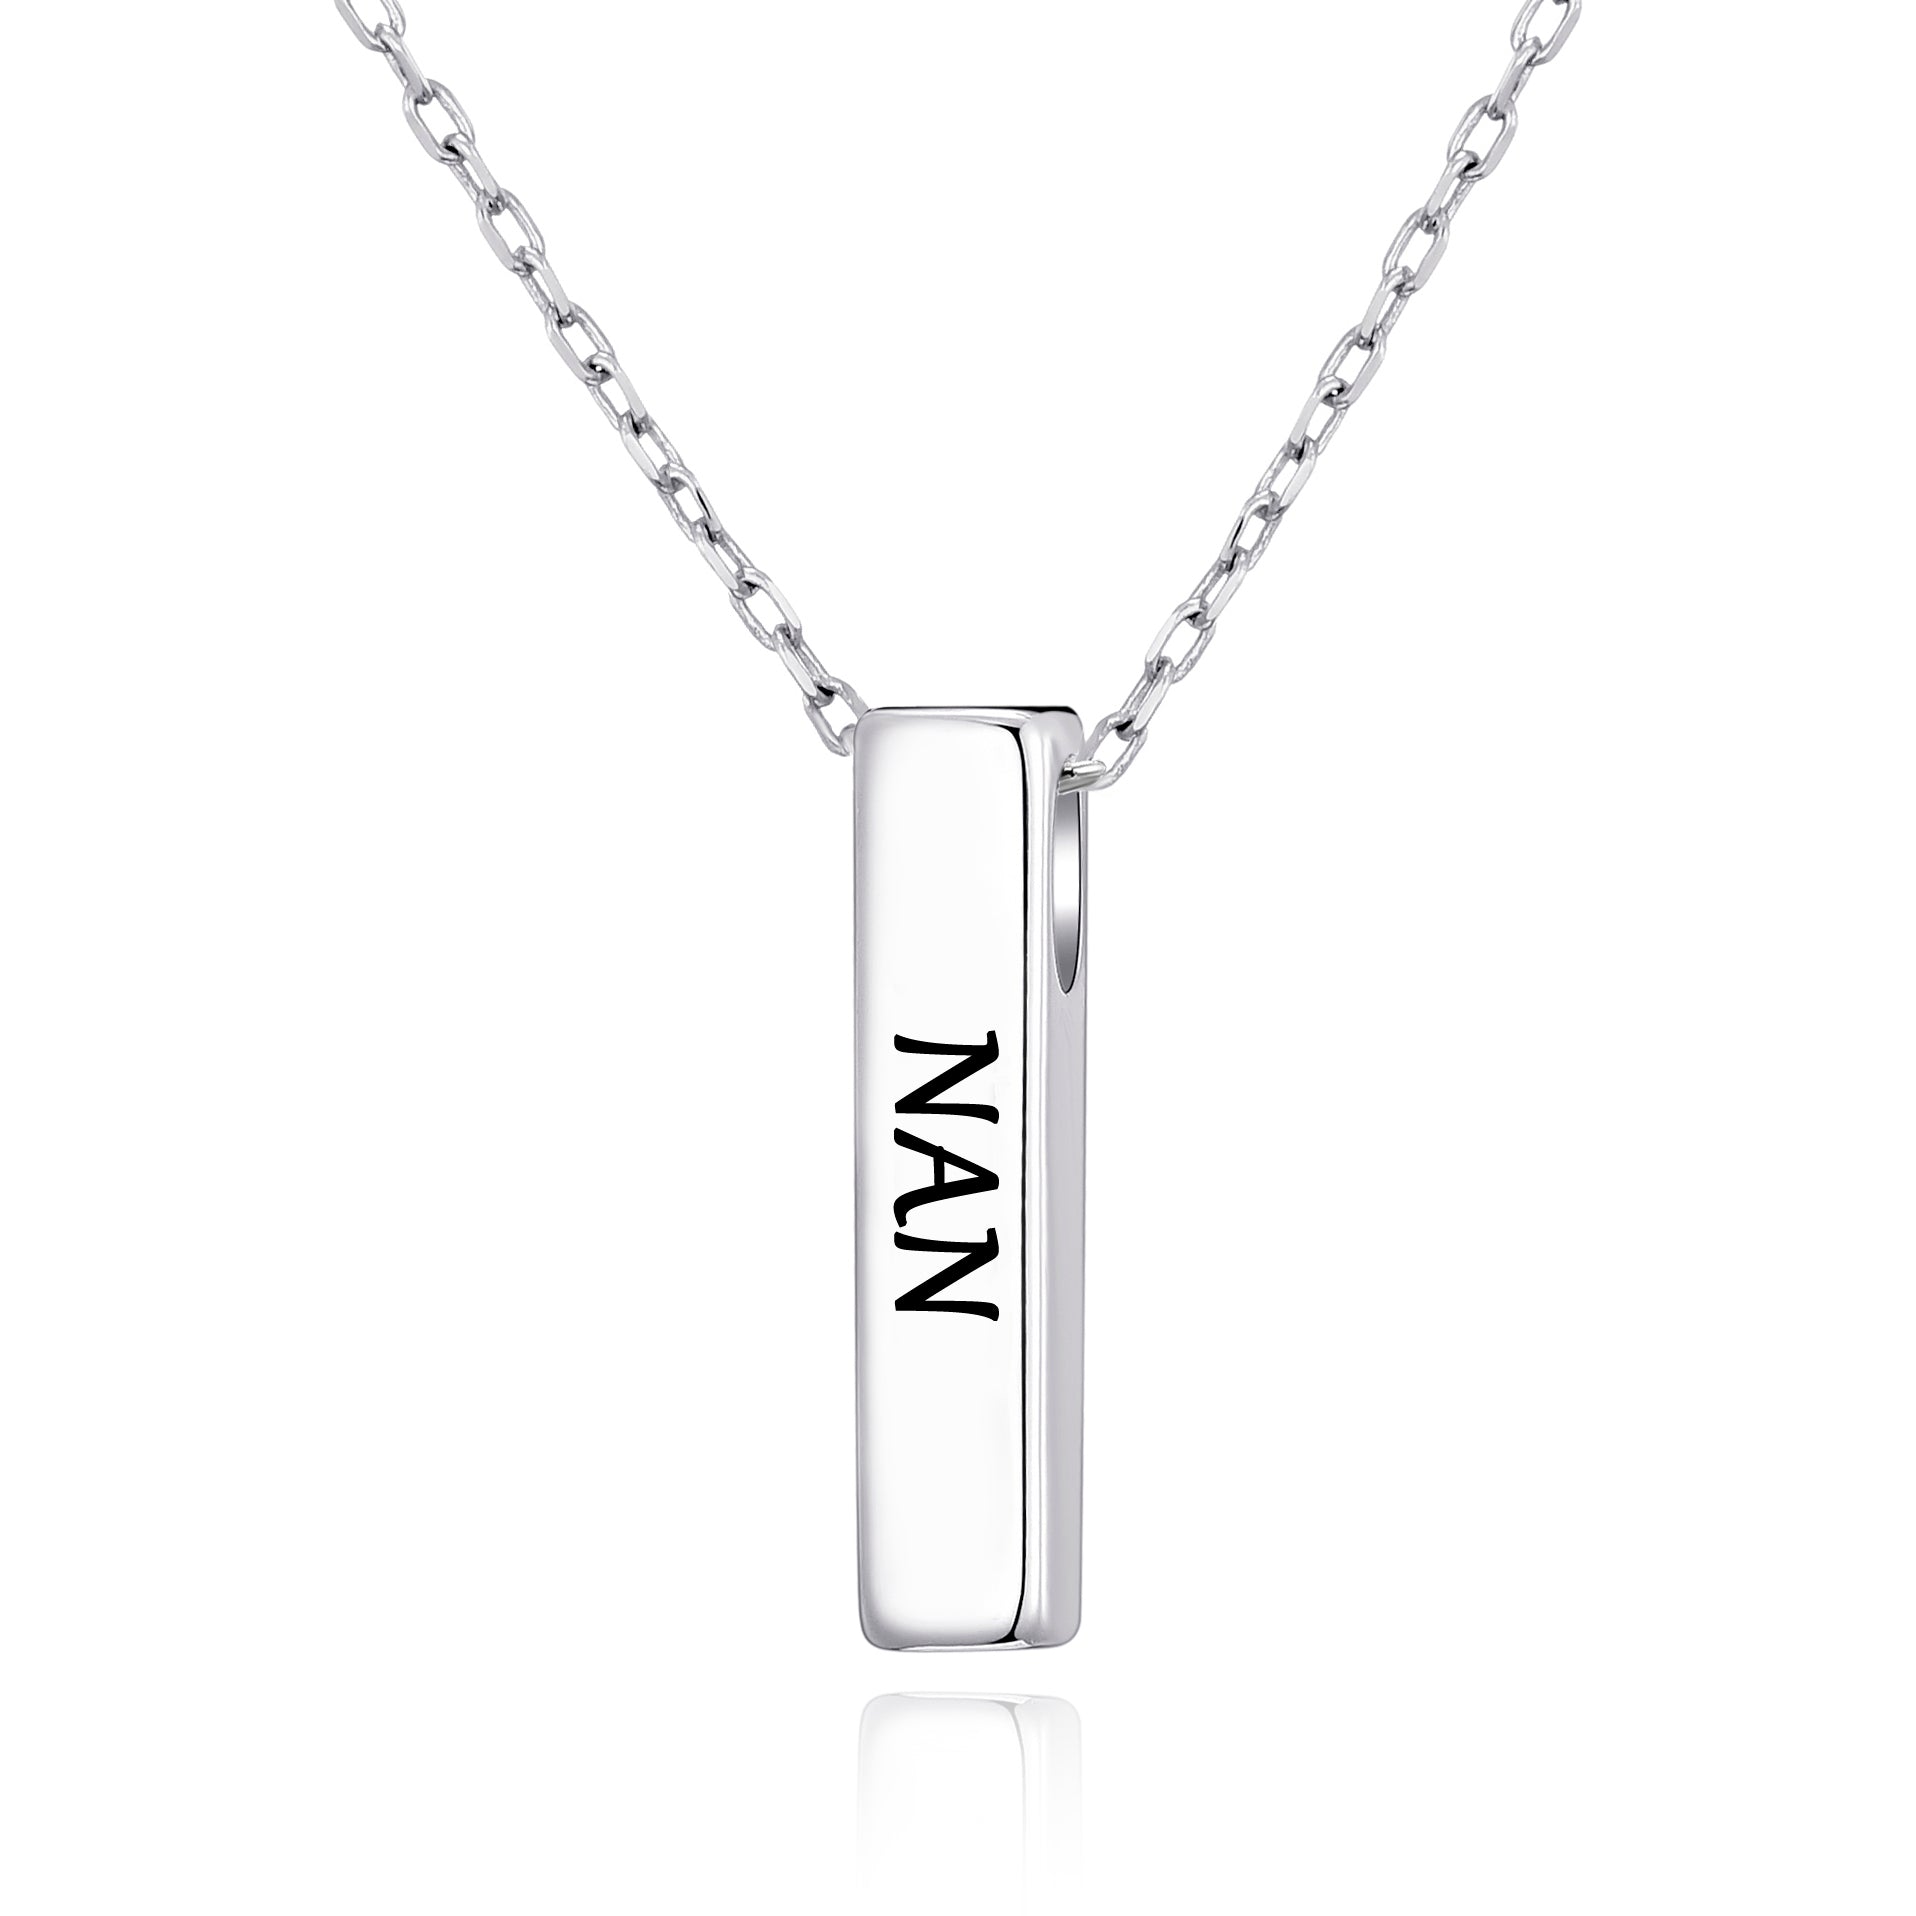 Silver Plated Nan Bar Necklace by Philip Jones Jewellery